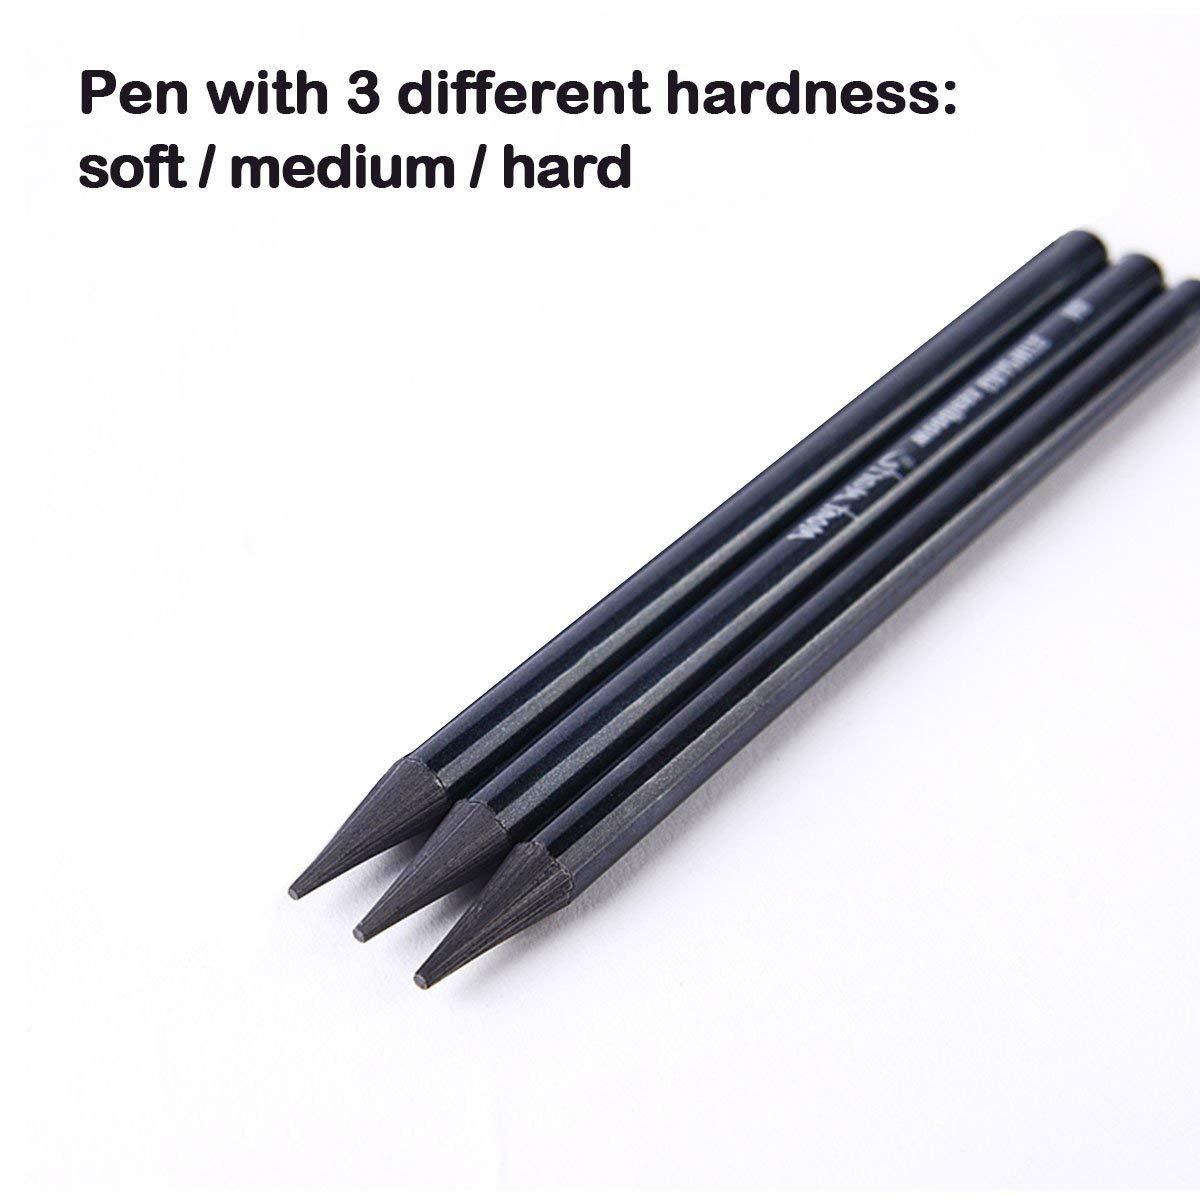 Keep Smiling Professional Woodless Charcoal Pencils Pack of 3 - thestationerycompany.pk